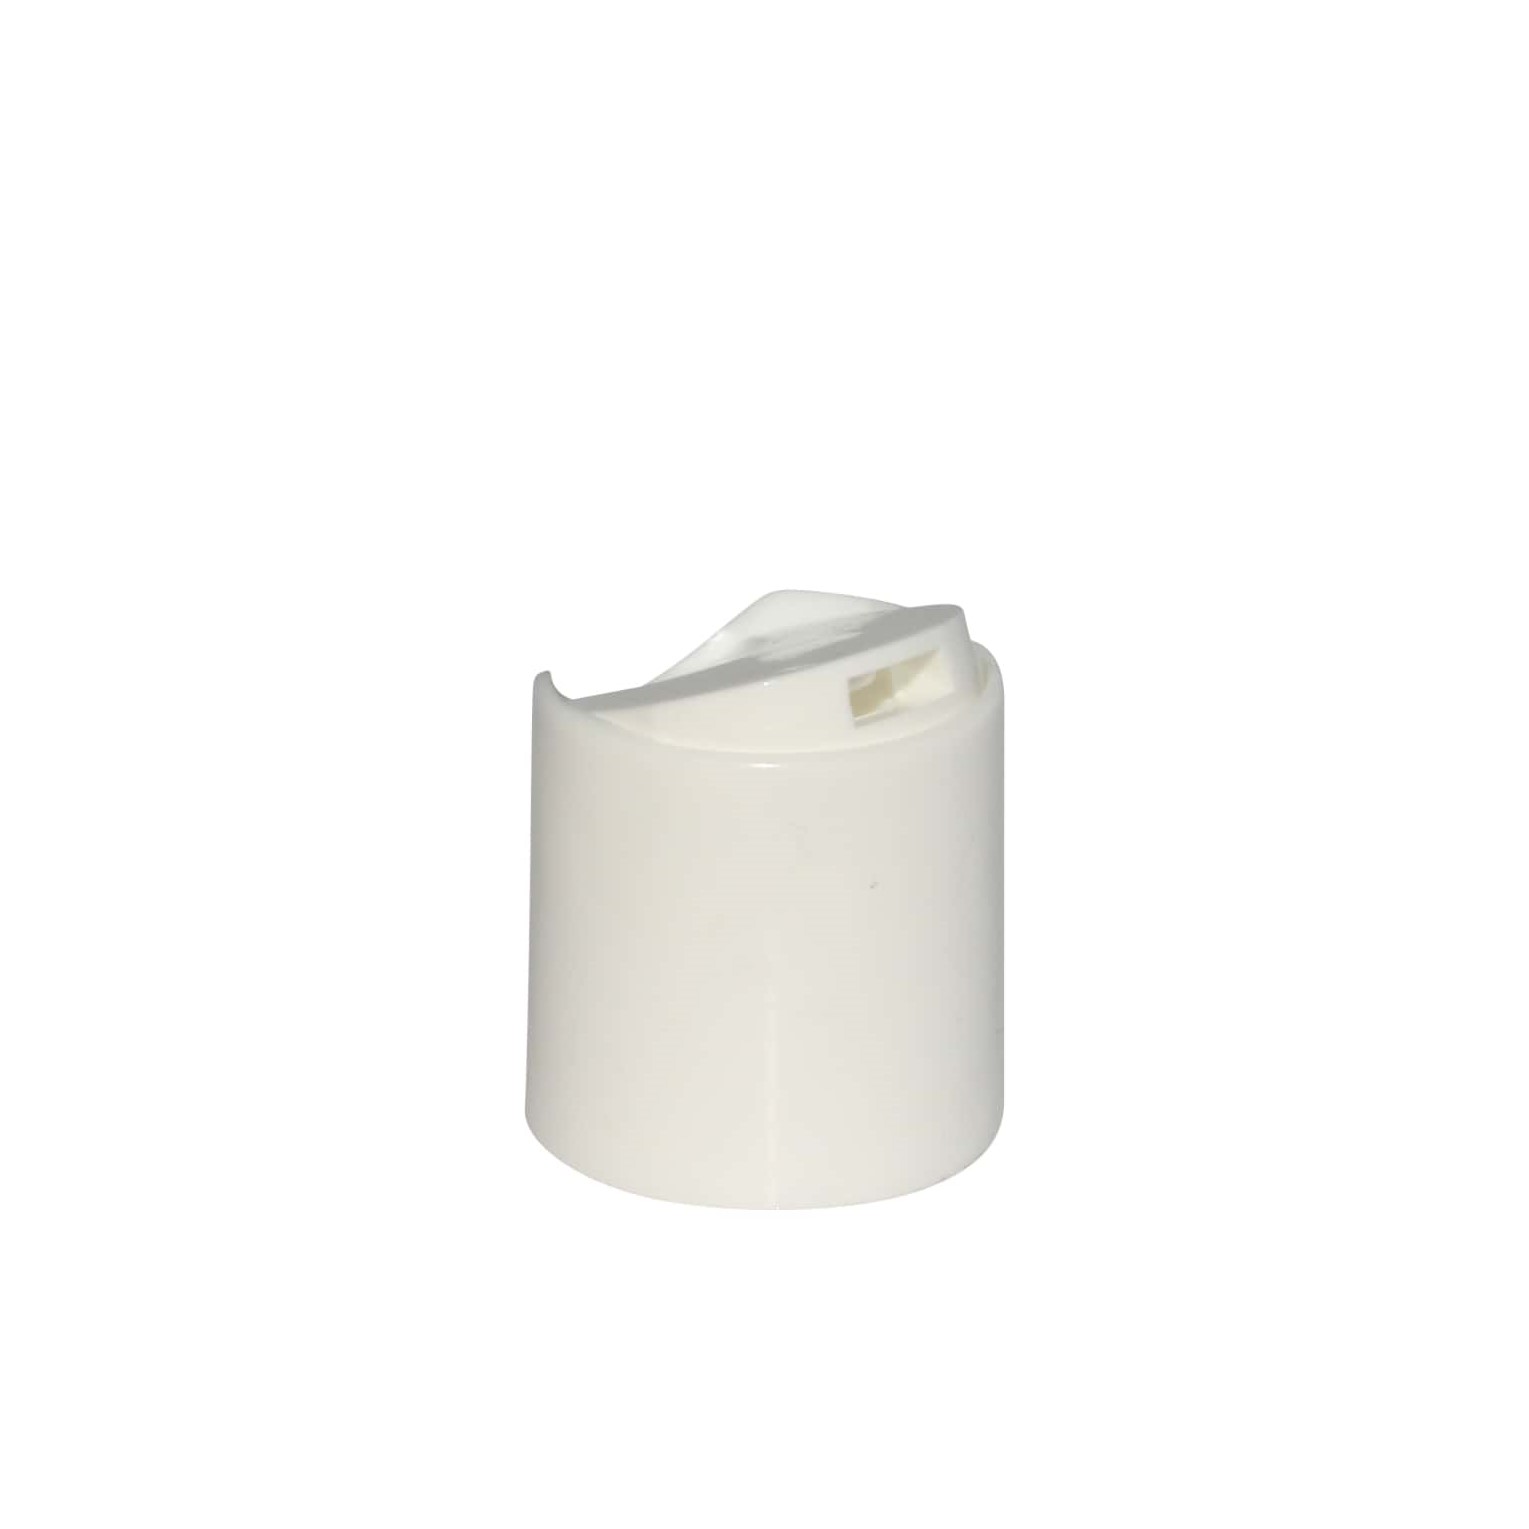 Screw cap with disc top, PP plastic, white, for opening: GPI 20/410